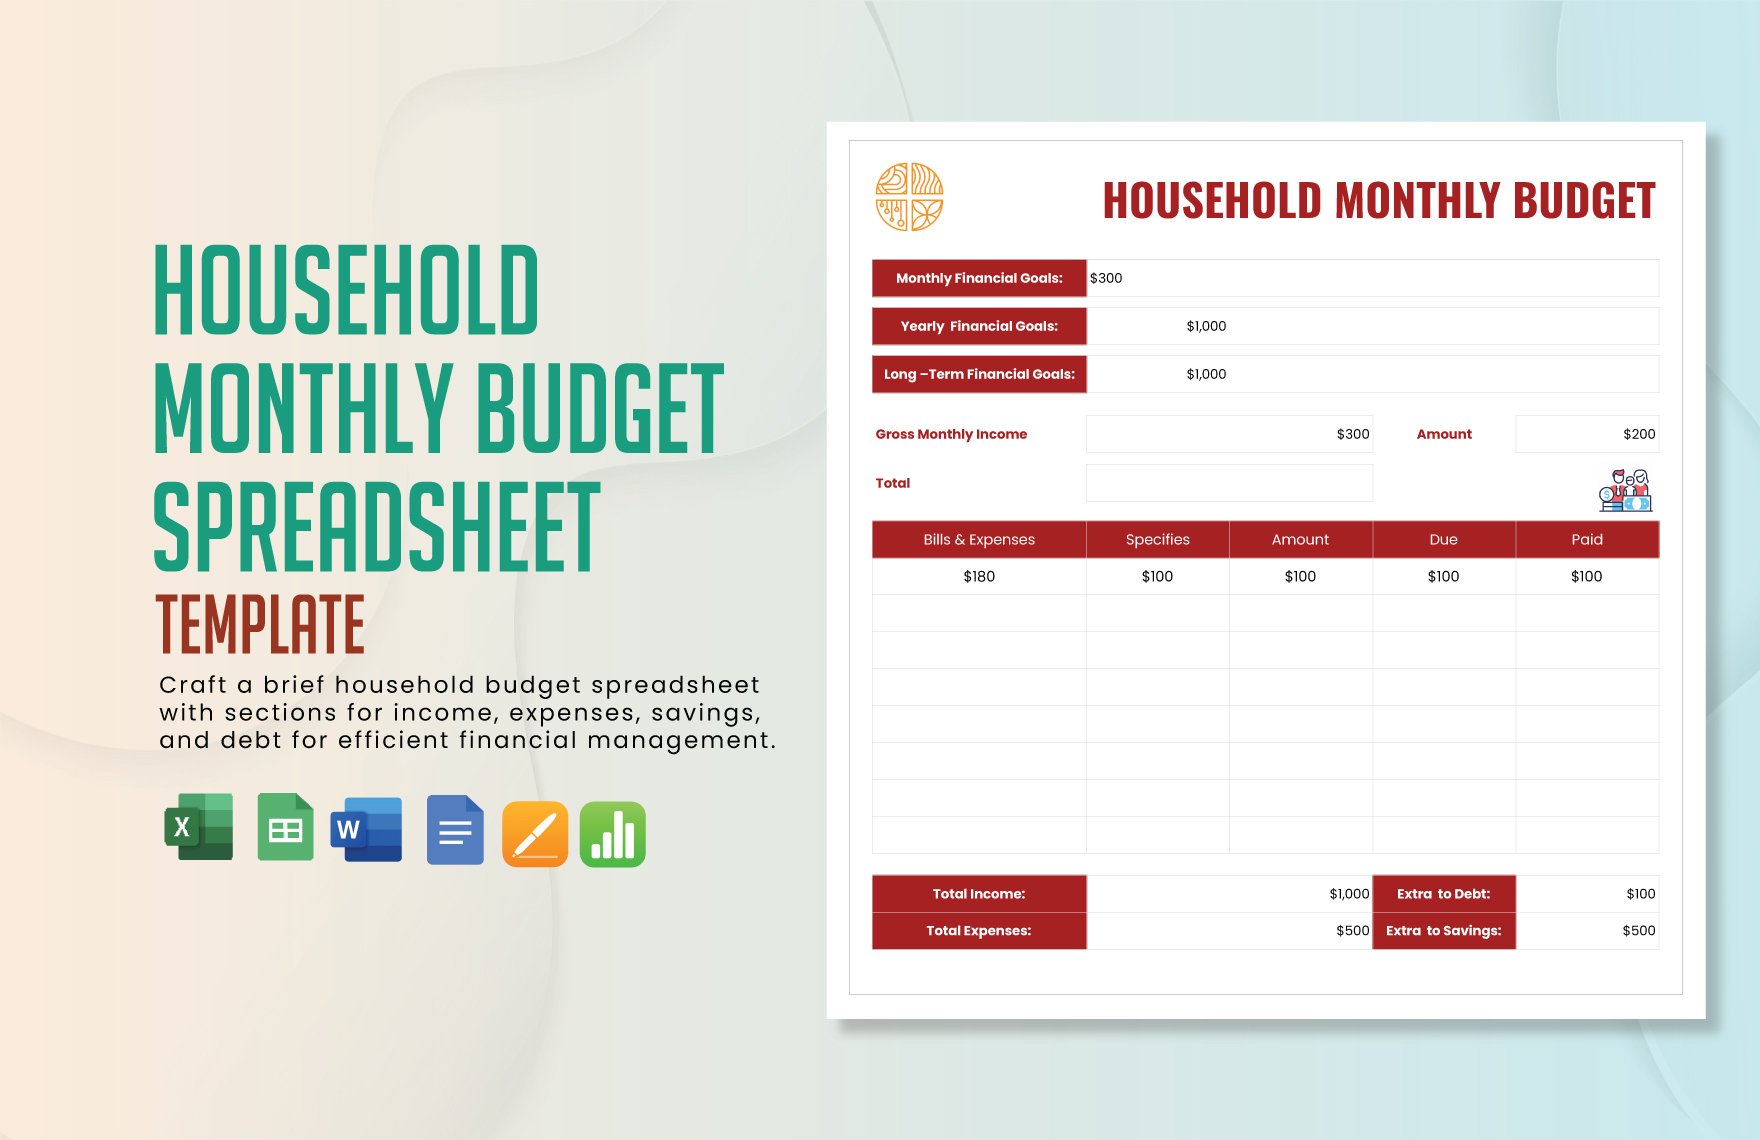 Free Household Monthly Budget Spreadsheet Template in Word, Google Docs, Excel, Google Sheets, Apple Pages, Apple Numbers